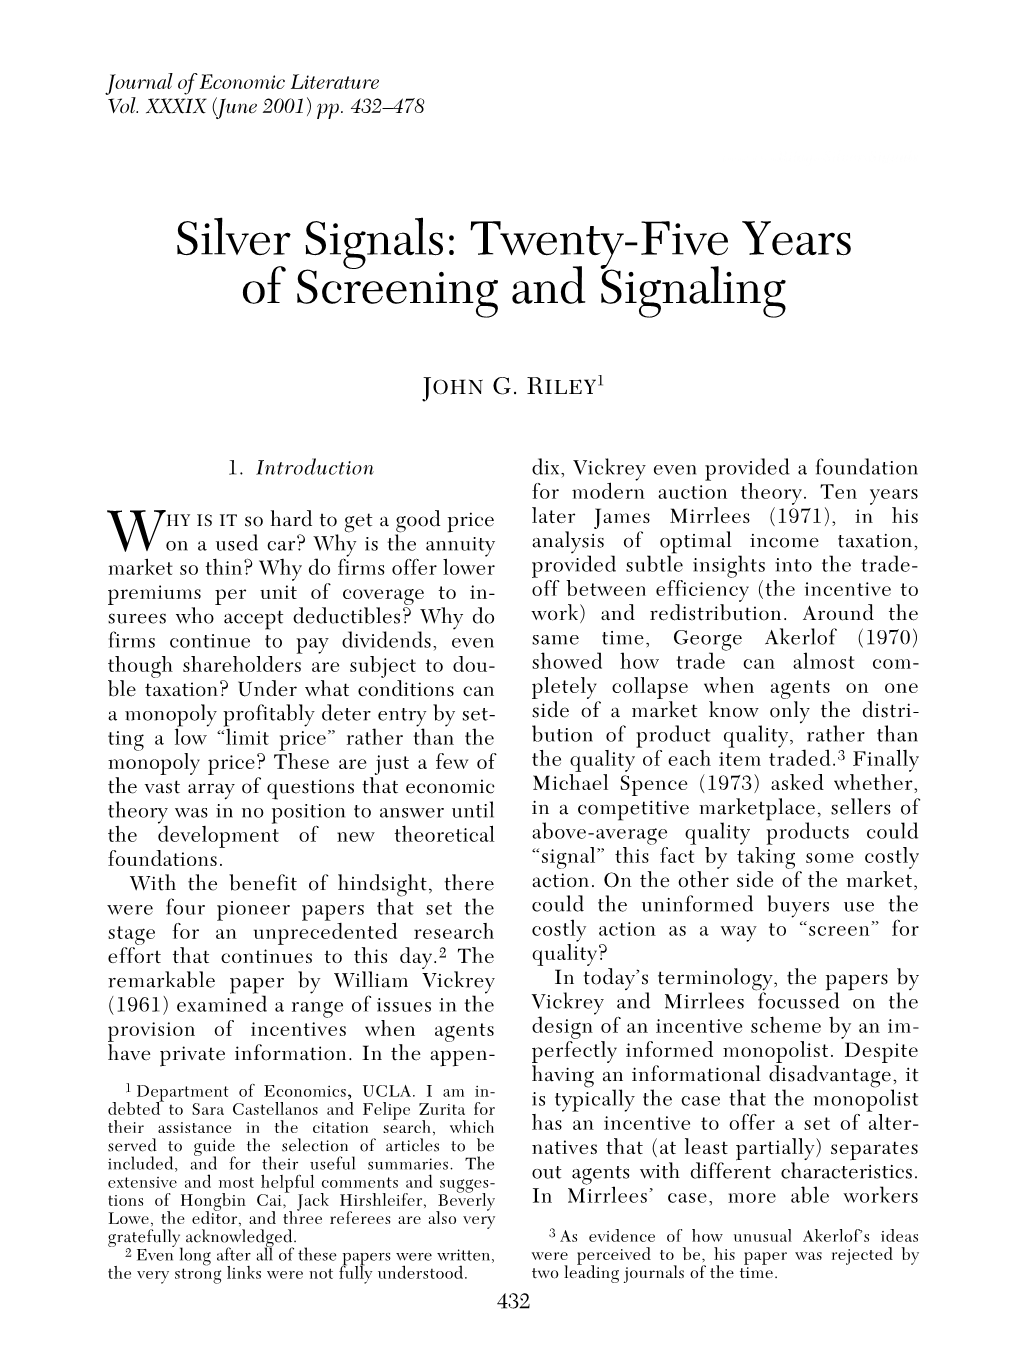 Silver Signals: Twenty-Five Years of Screening and Signaling